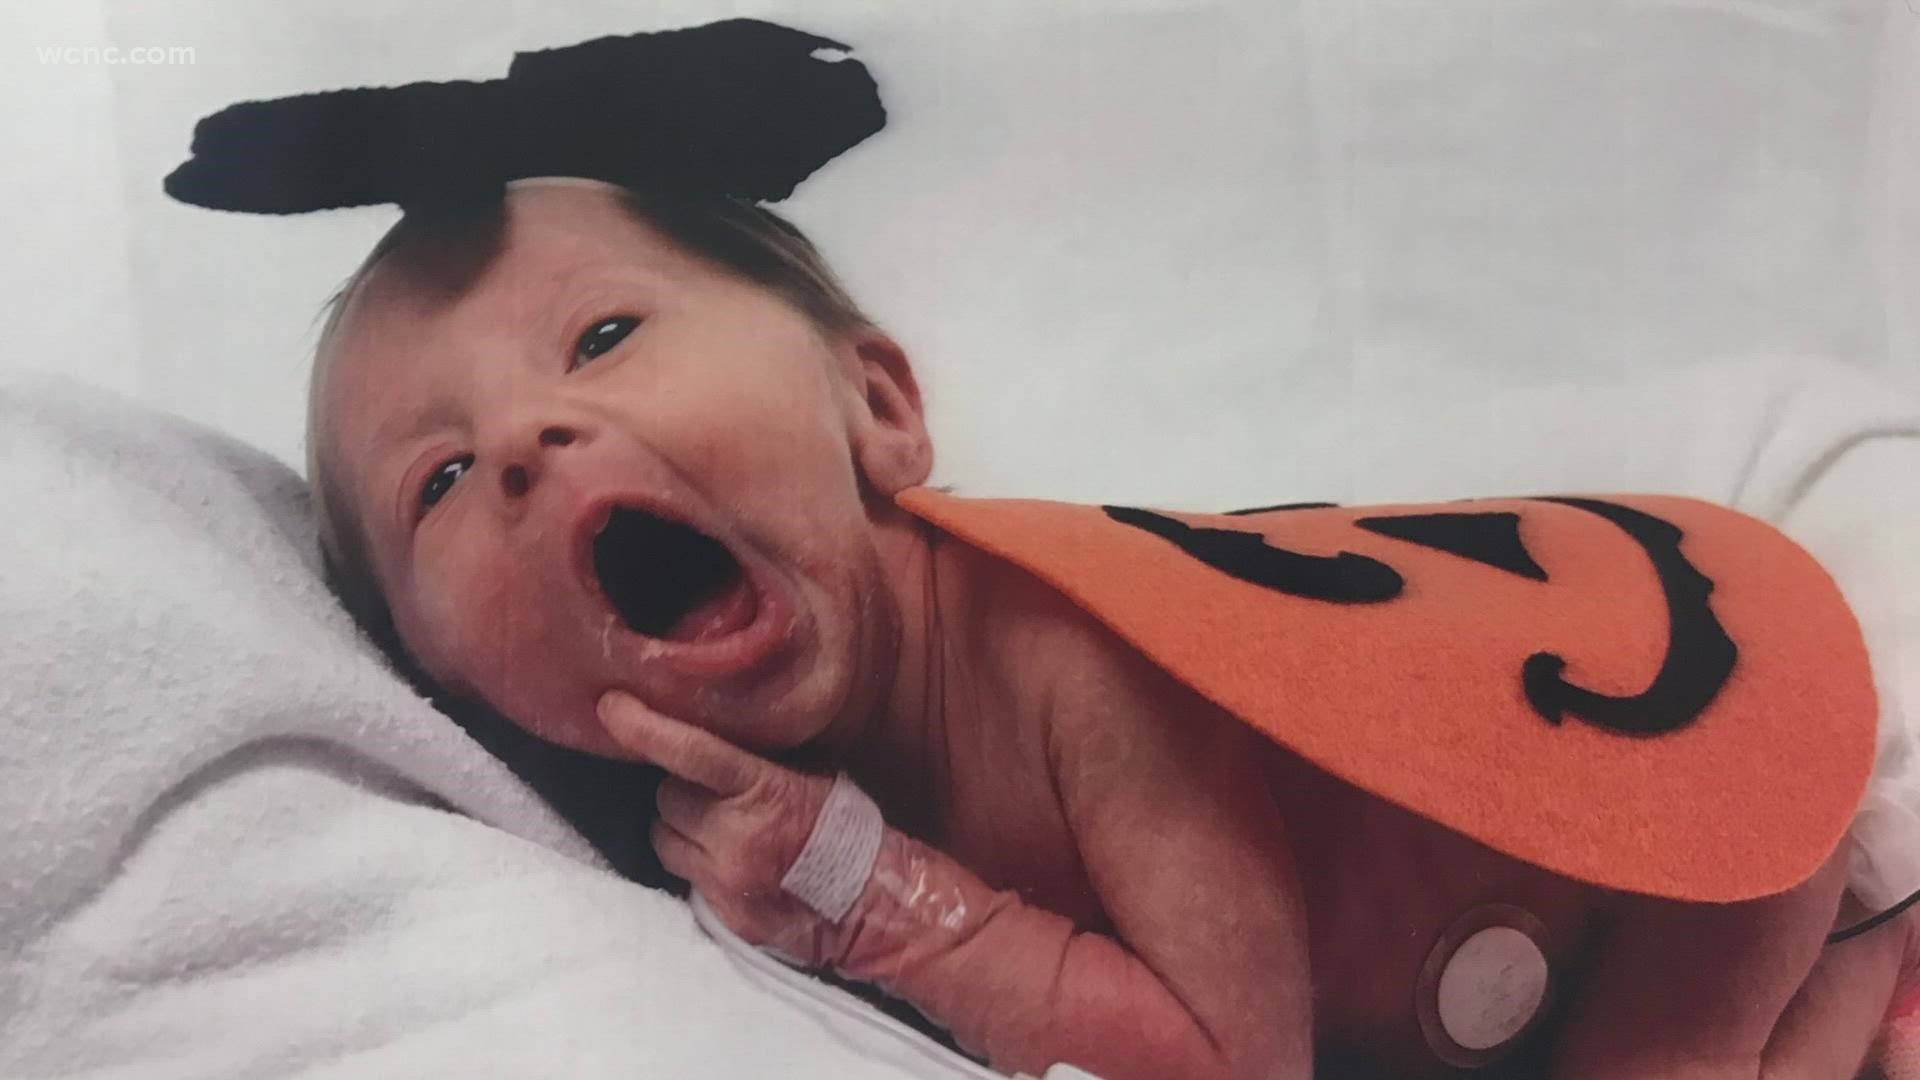 These tiny babies in tiny costumes in NICU will melt your heart